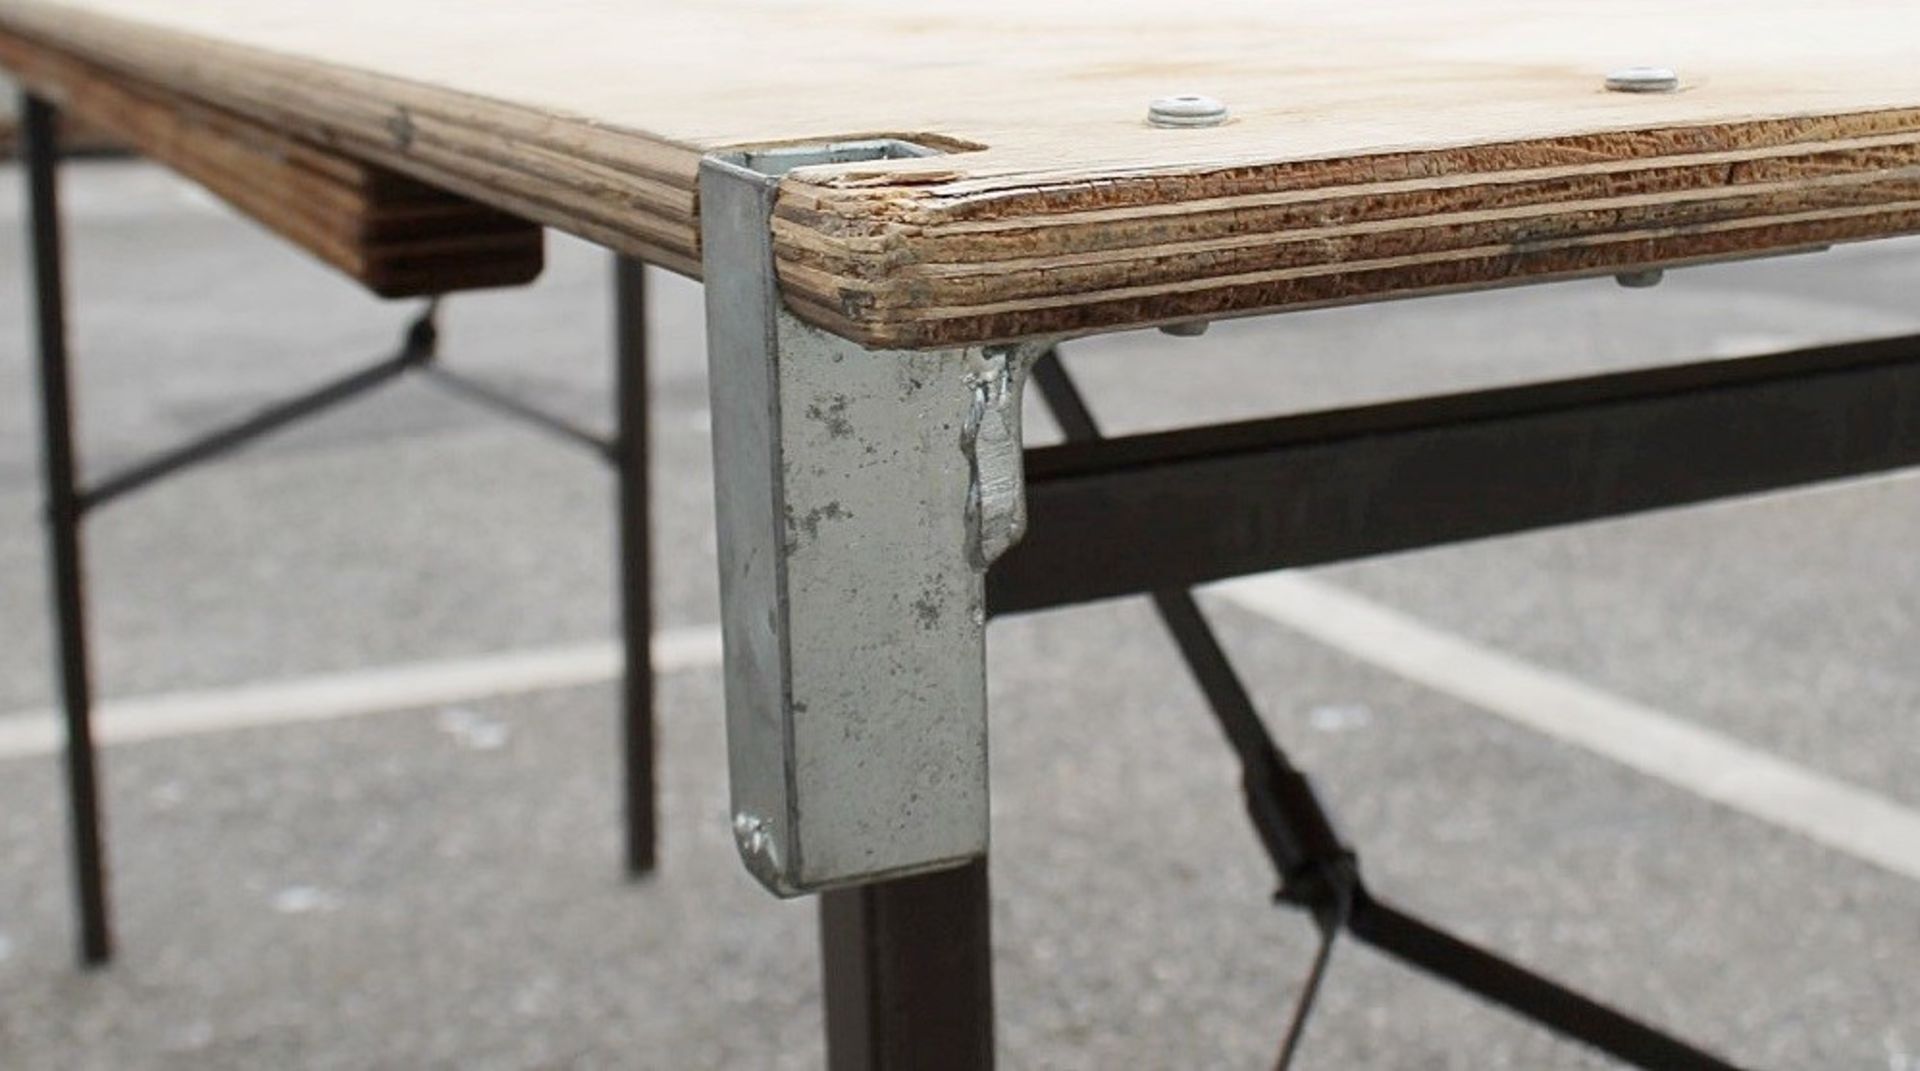 1 x Folding 6ft Wooden Topped Rectangular Trestle Table - Recently Removed From A Well-known - Image 6 of 6